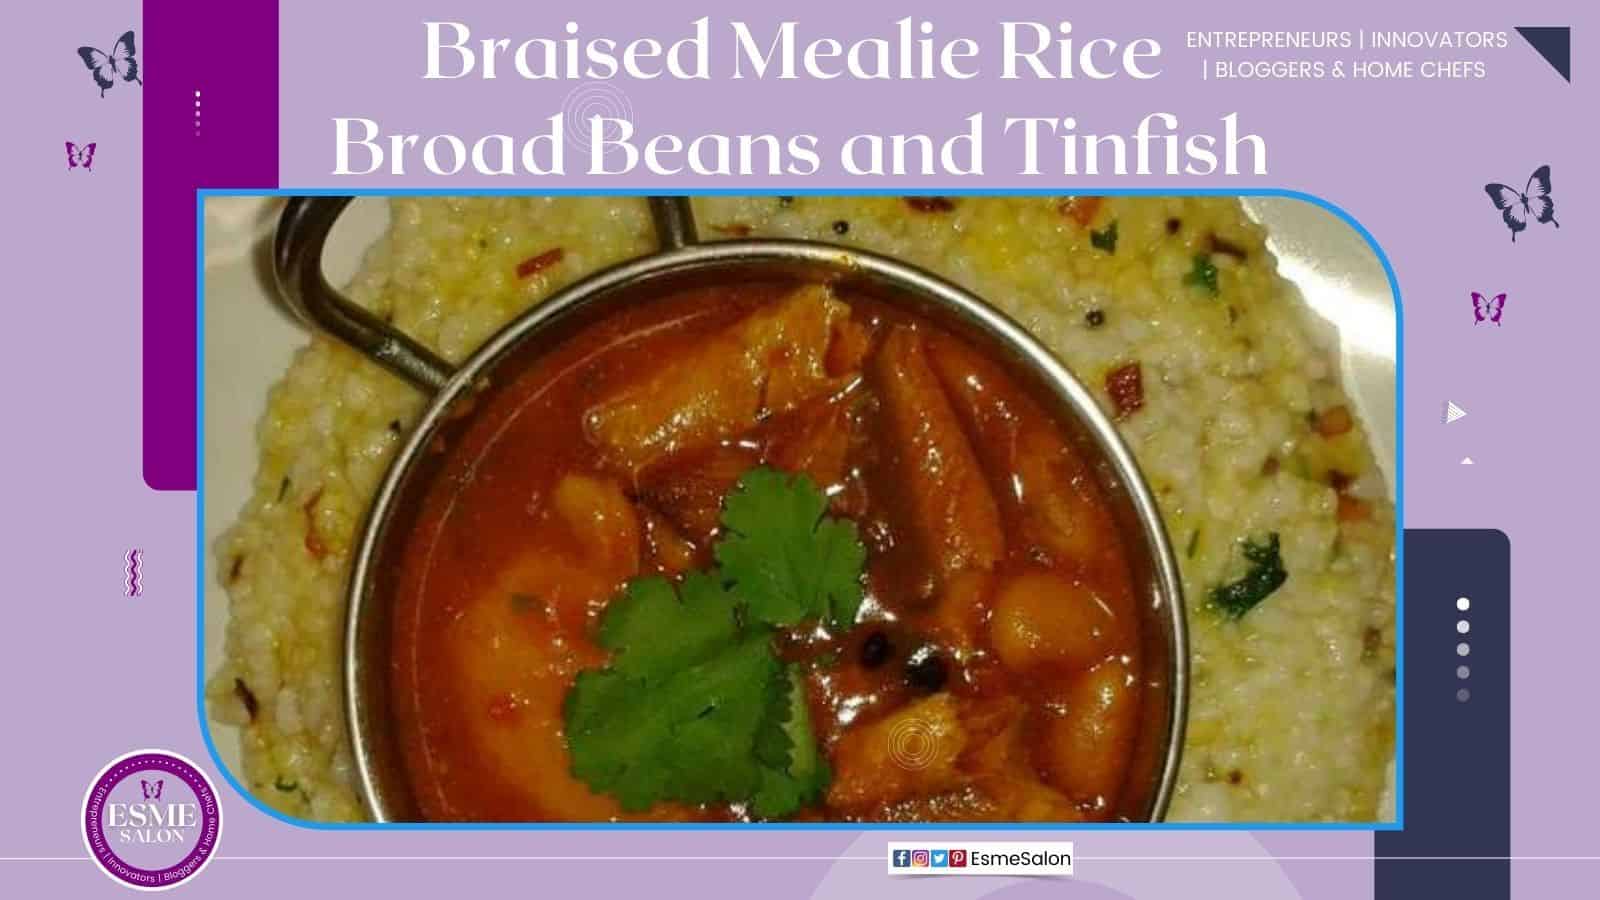 Braised Mealie Rice with Broad Beans and Tinned Fish